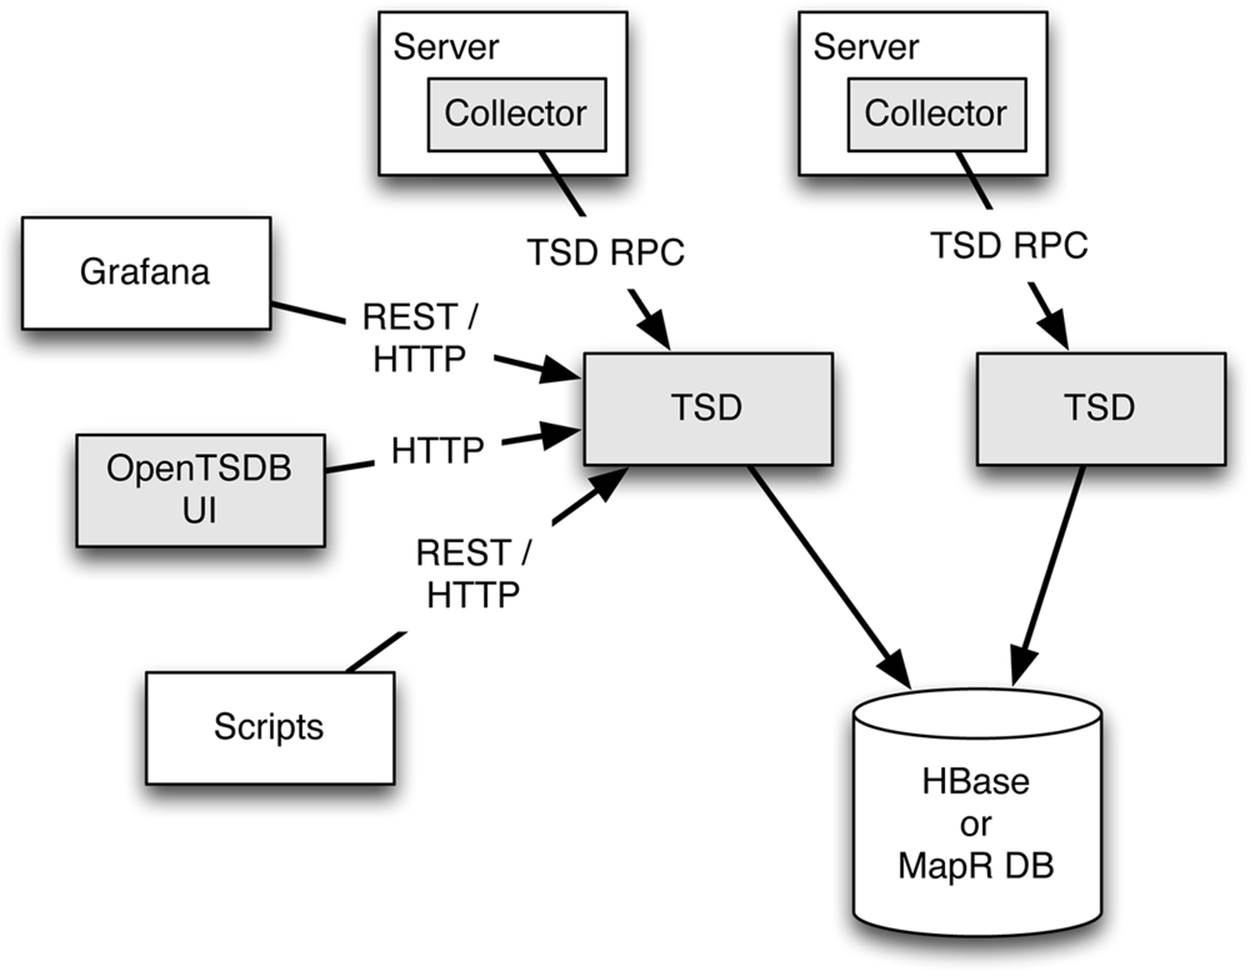 Open TSDB consists of a number of cooperating components to load and access data from the storage tier of a time series database. These include data collectors, time-series daemons (TSD), and various user interface functions. Open TSDB components are colored gray.